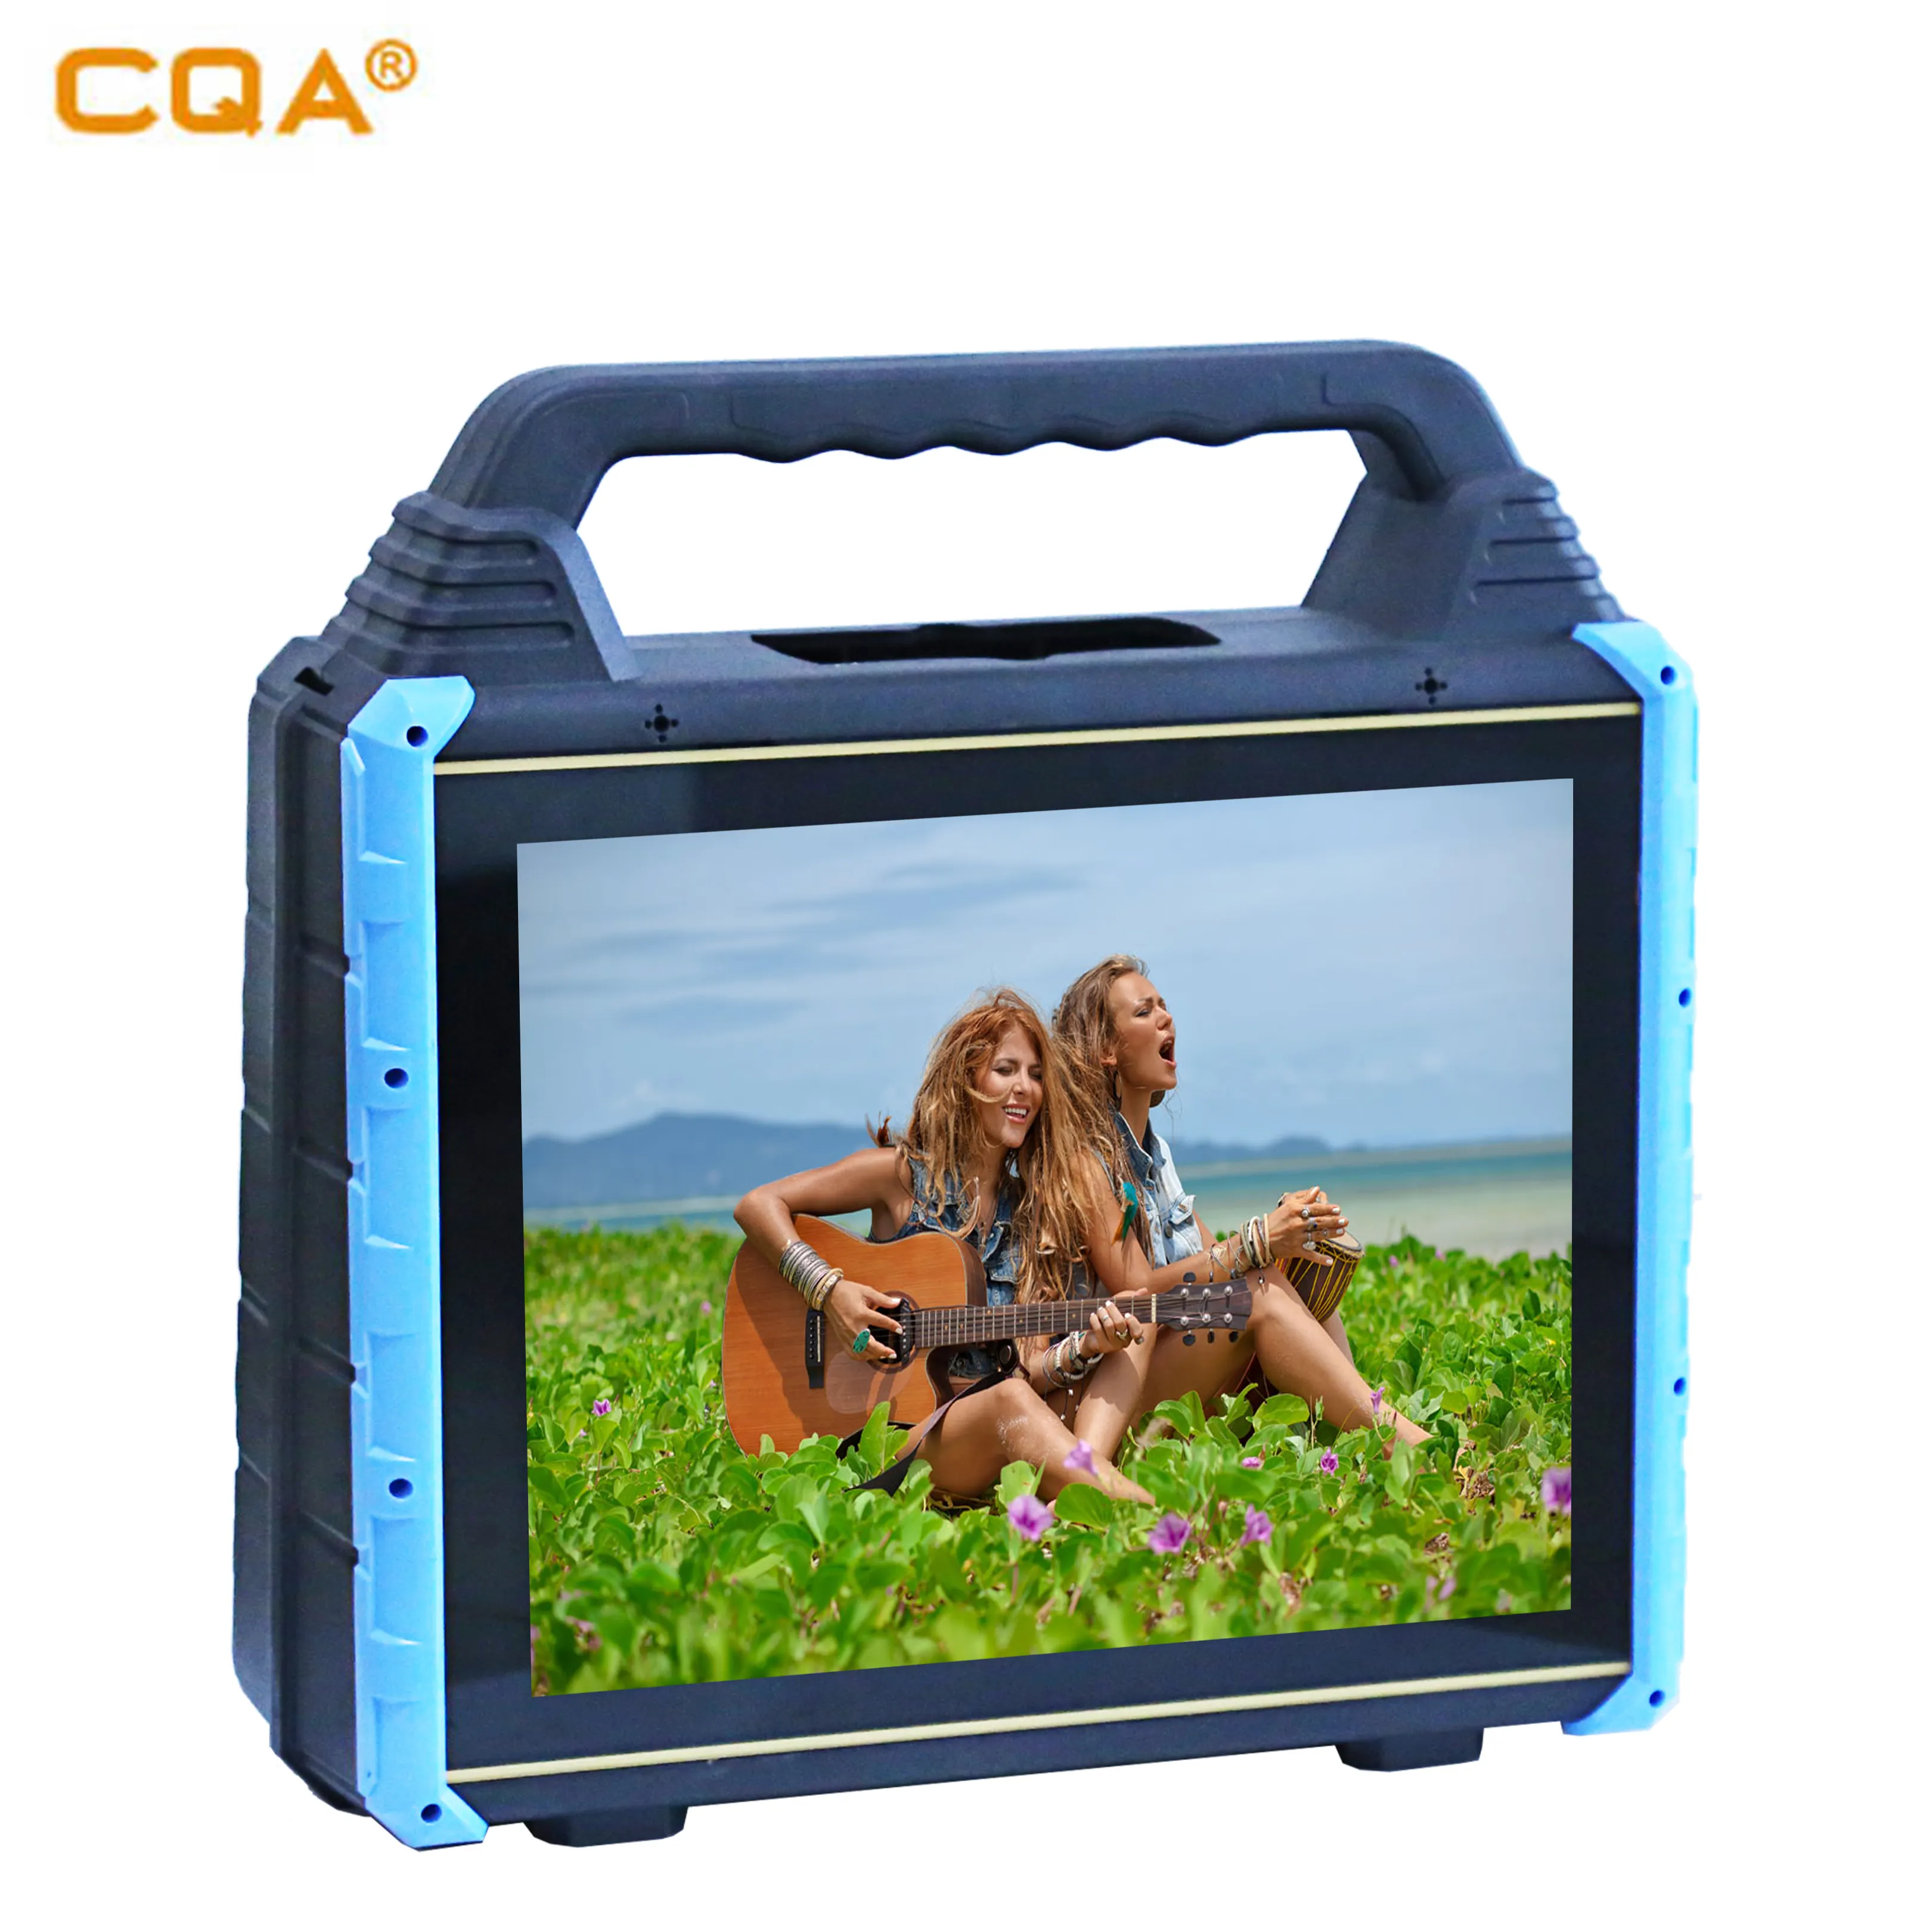 CQA multimedia screen speaker system with wireless microphone and WiFi function